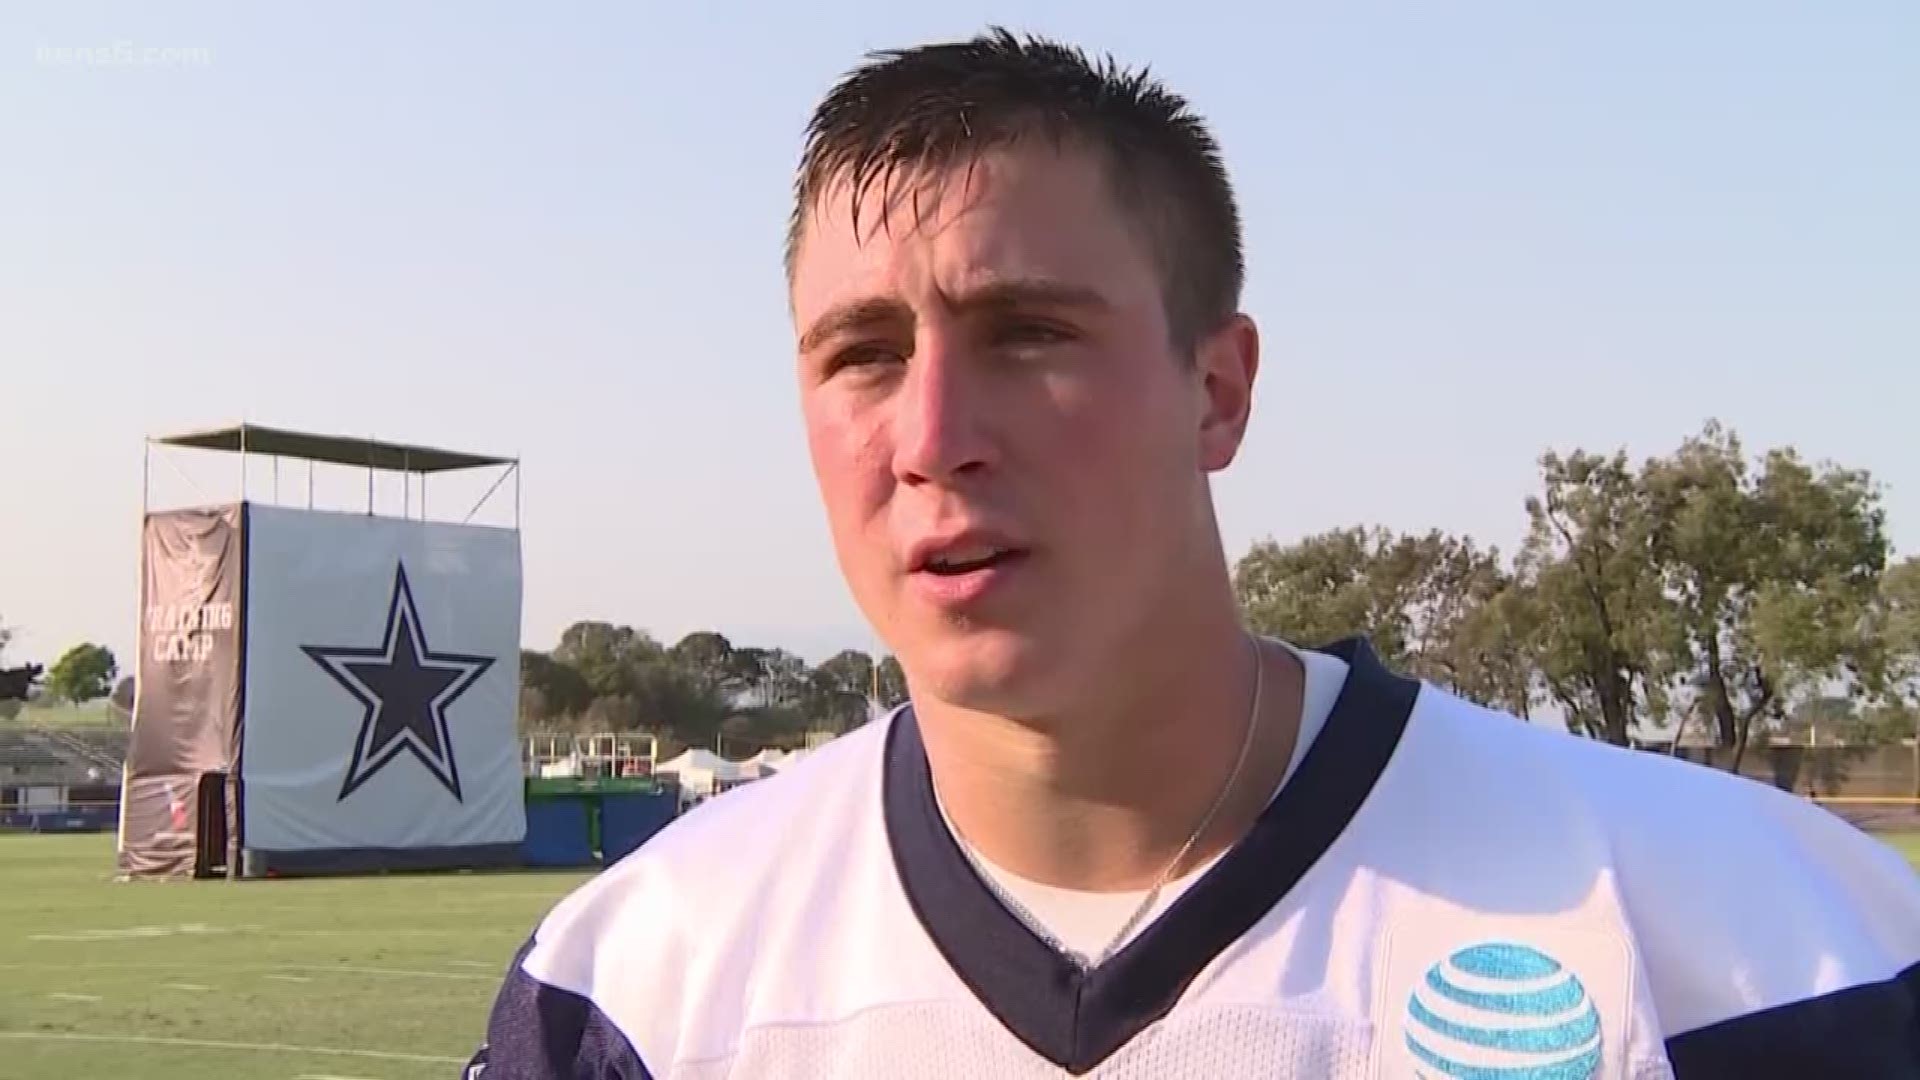 Dalton Sturm is trying to defy the odds once again and make the Dallas Cowboys roster this season.